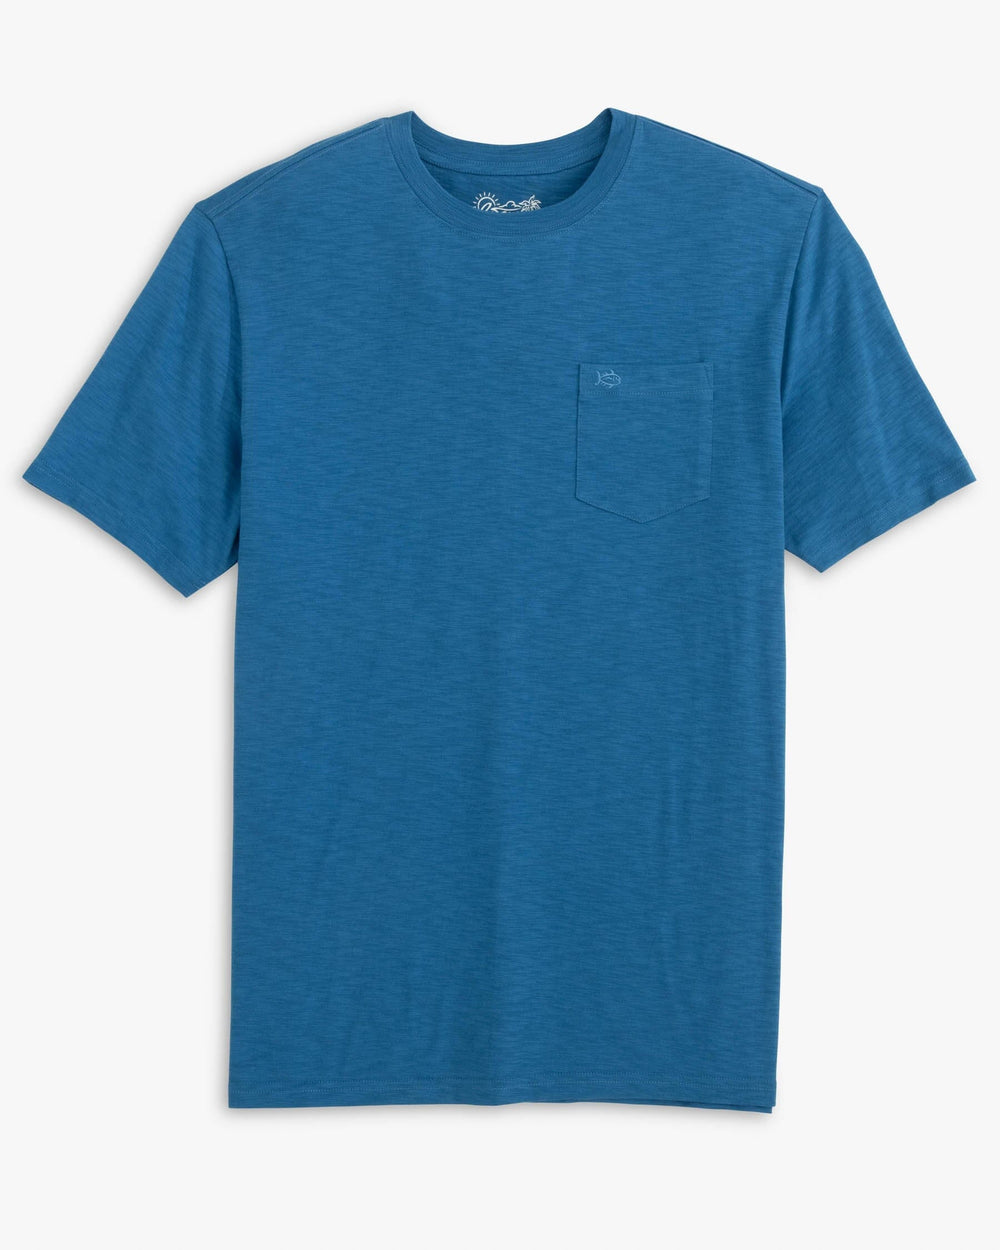 The front view of the Southern Tide Sun Farer Short Sleeve T-Shirt by Southern Tide - Atlantic Blue